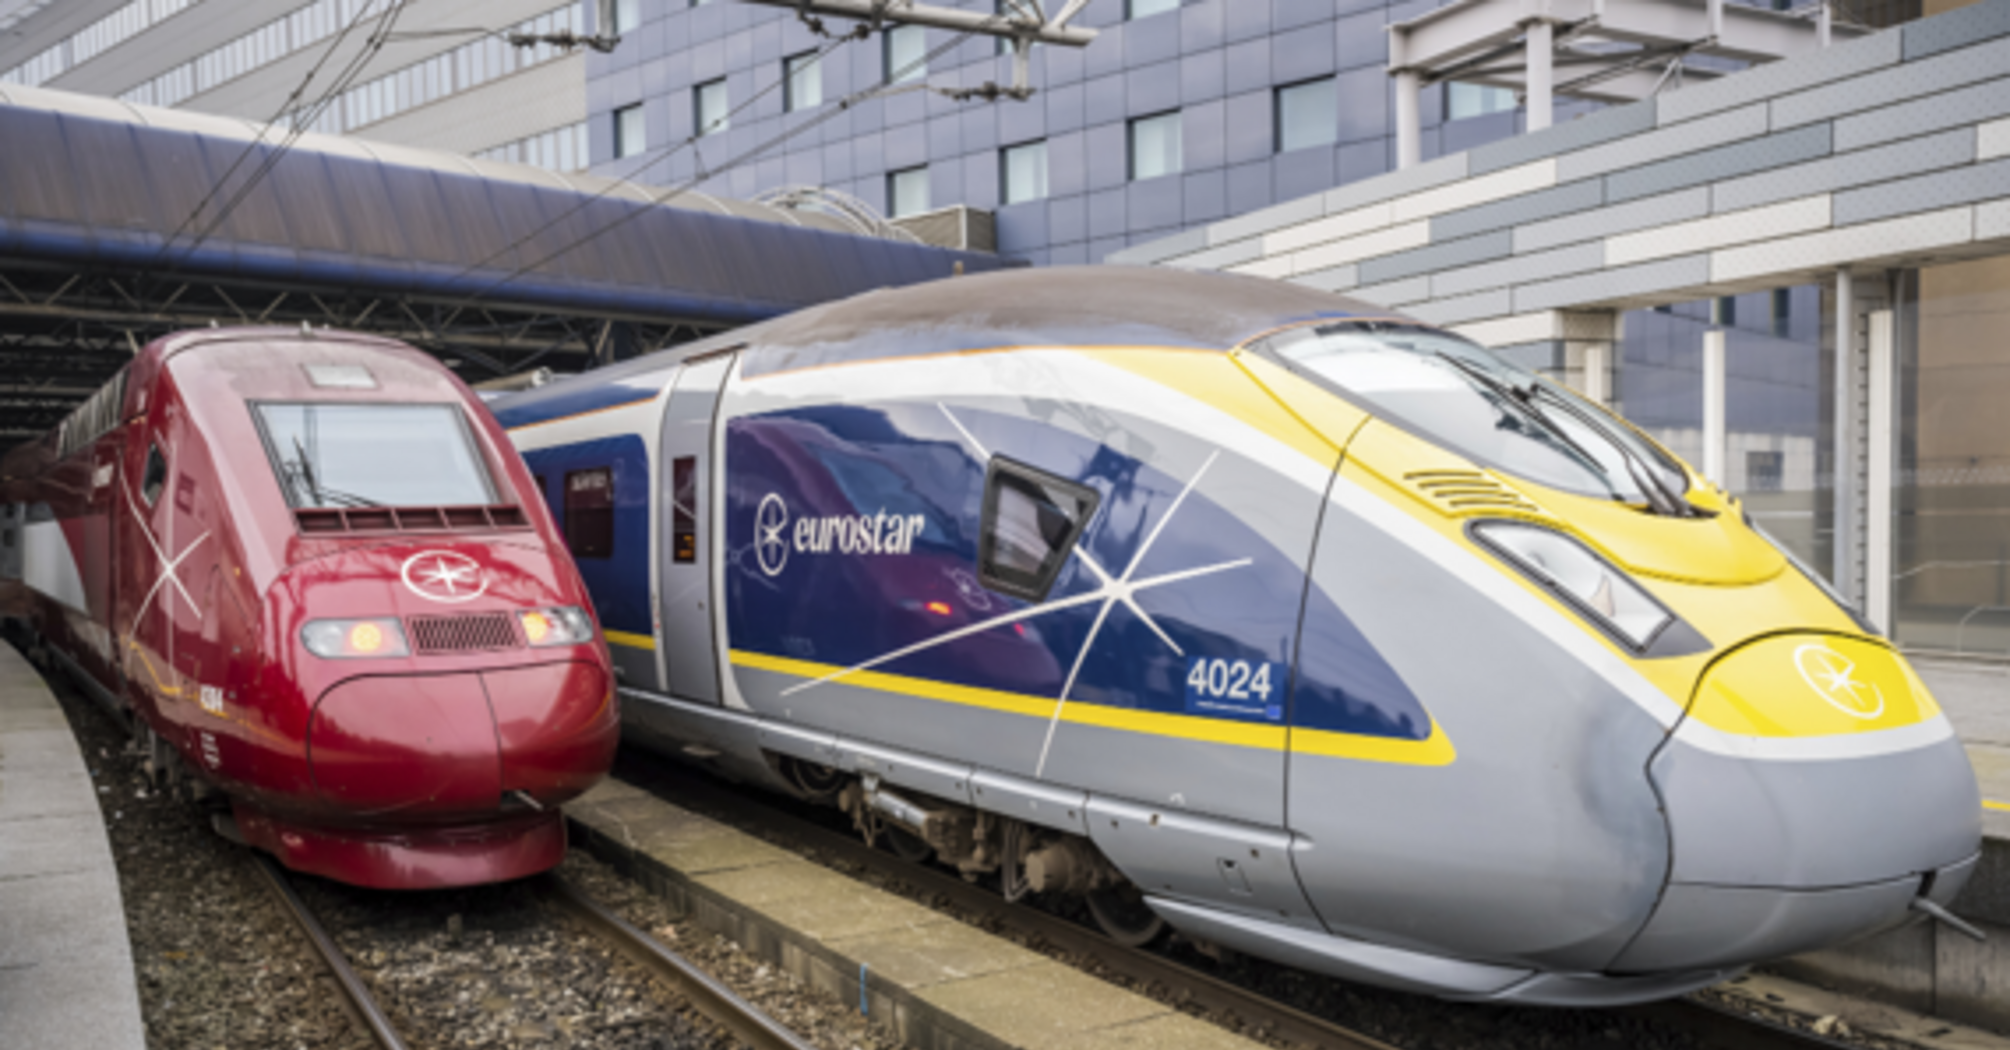 The Eurostar London-Amsterdam service will operate this summer despite the reconstruction of the Dutch station